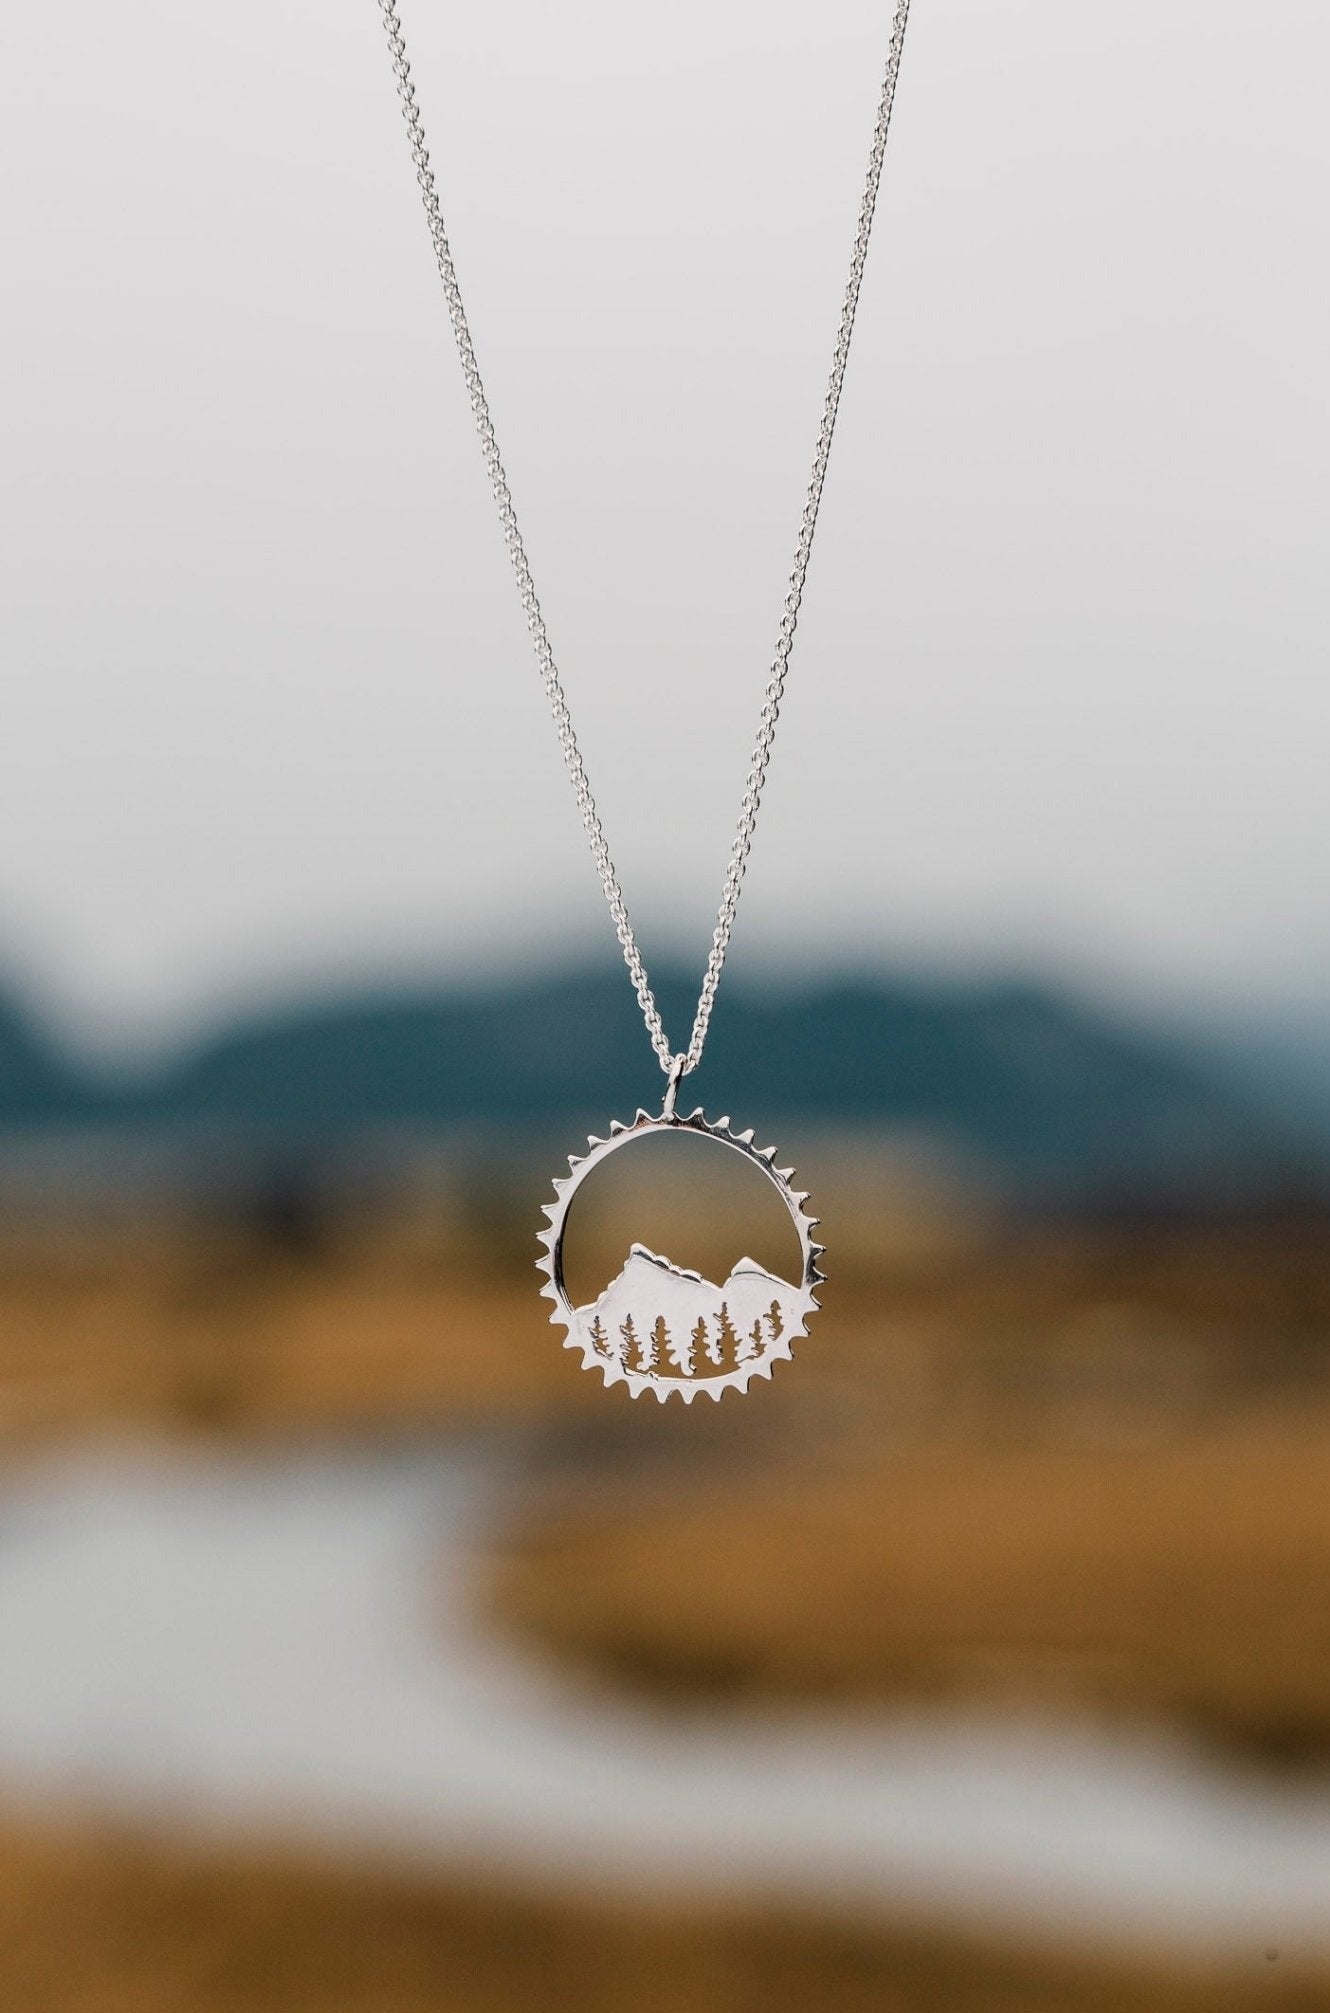 Sterling silver Amore necklace pictured in front of blurred stream and mountain background